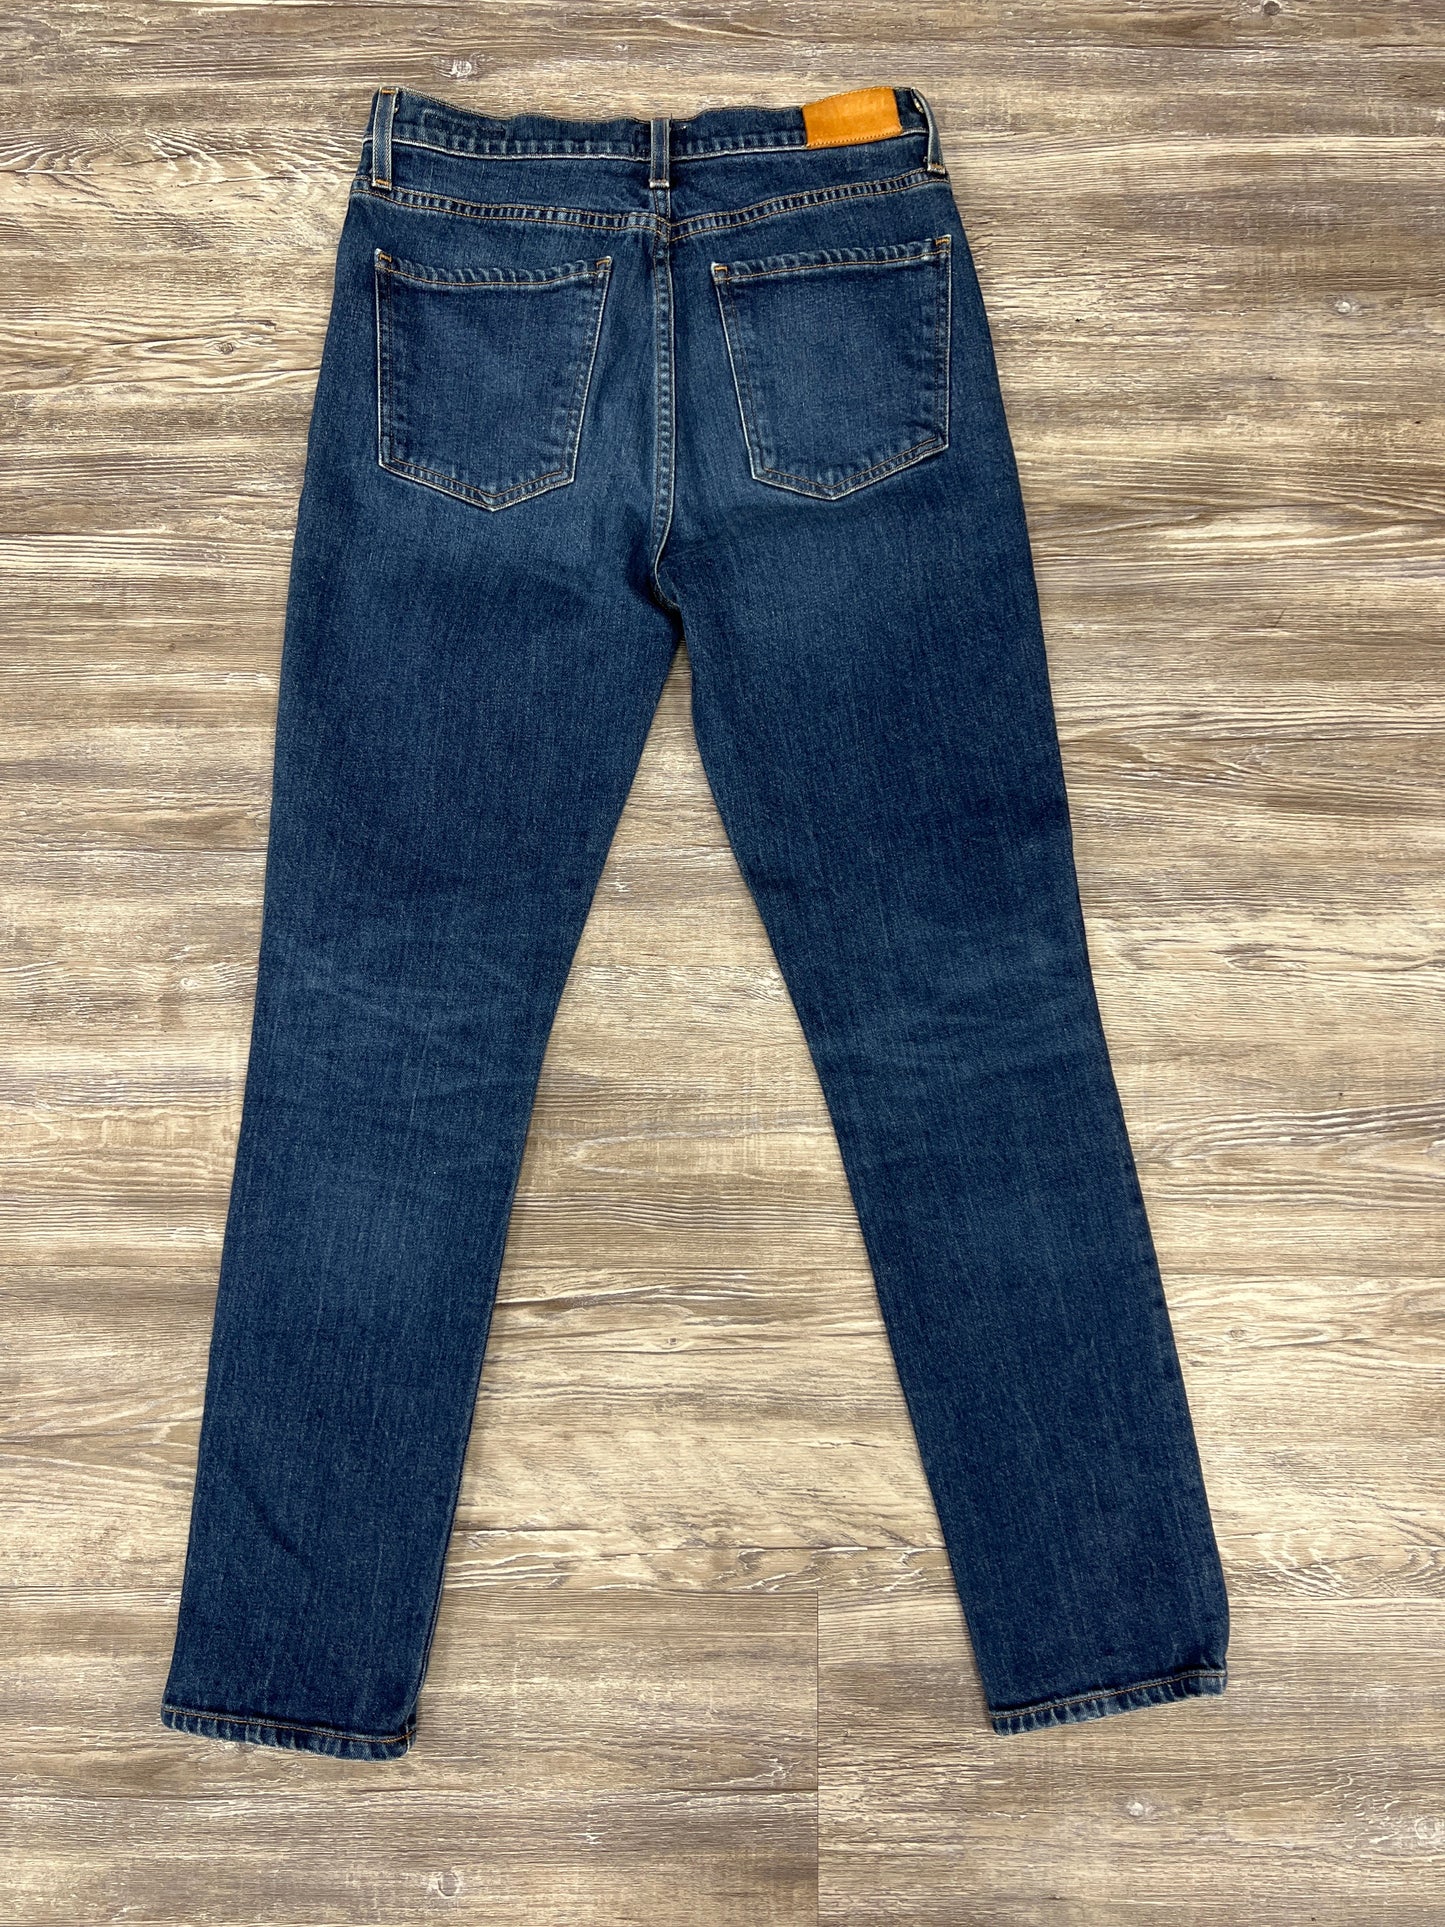 Jeans Designer By Citizens Of Humanity Size: 2